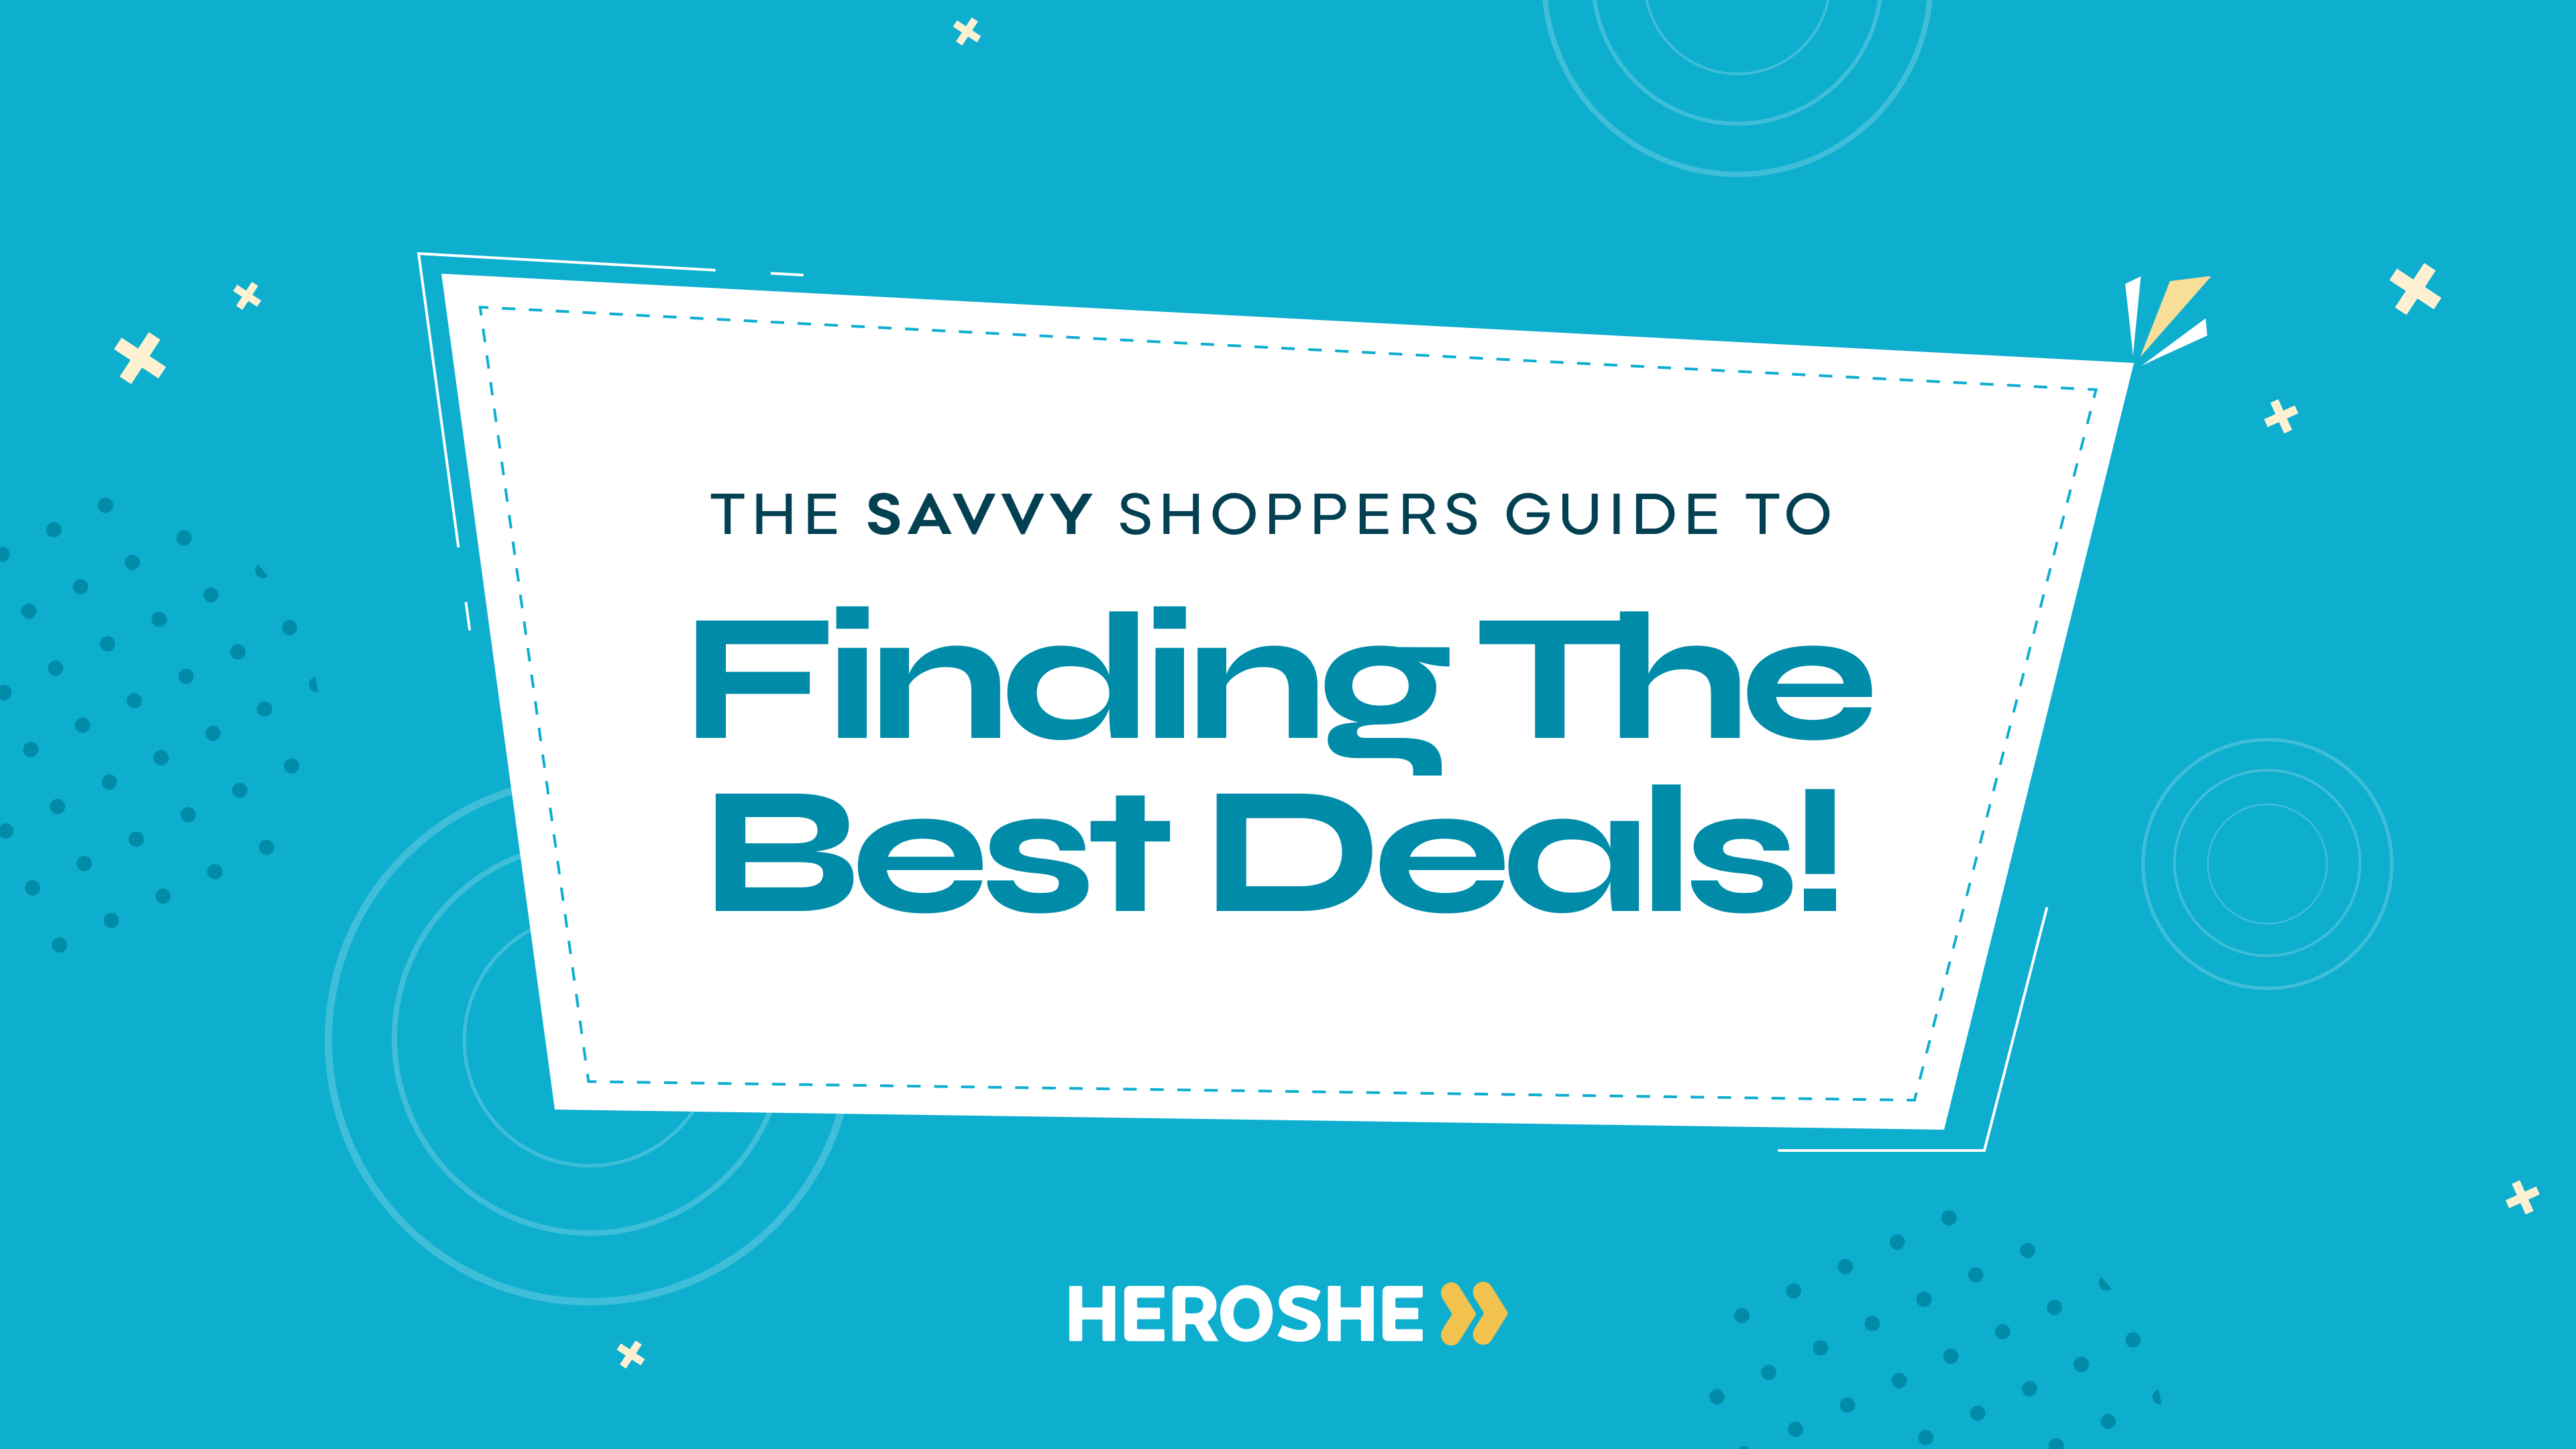 The Savvy Shopper's Guide to Finding the Best Deals